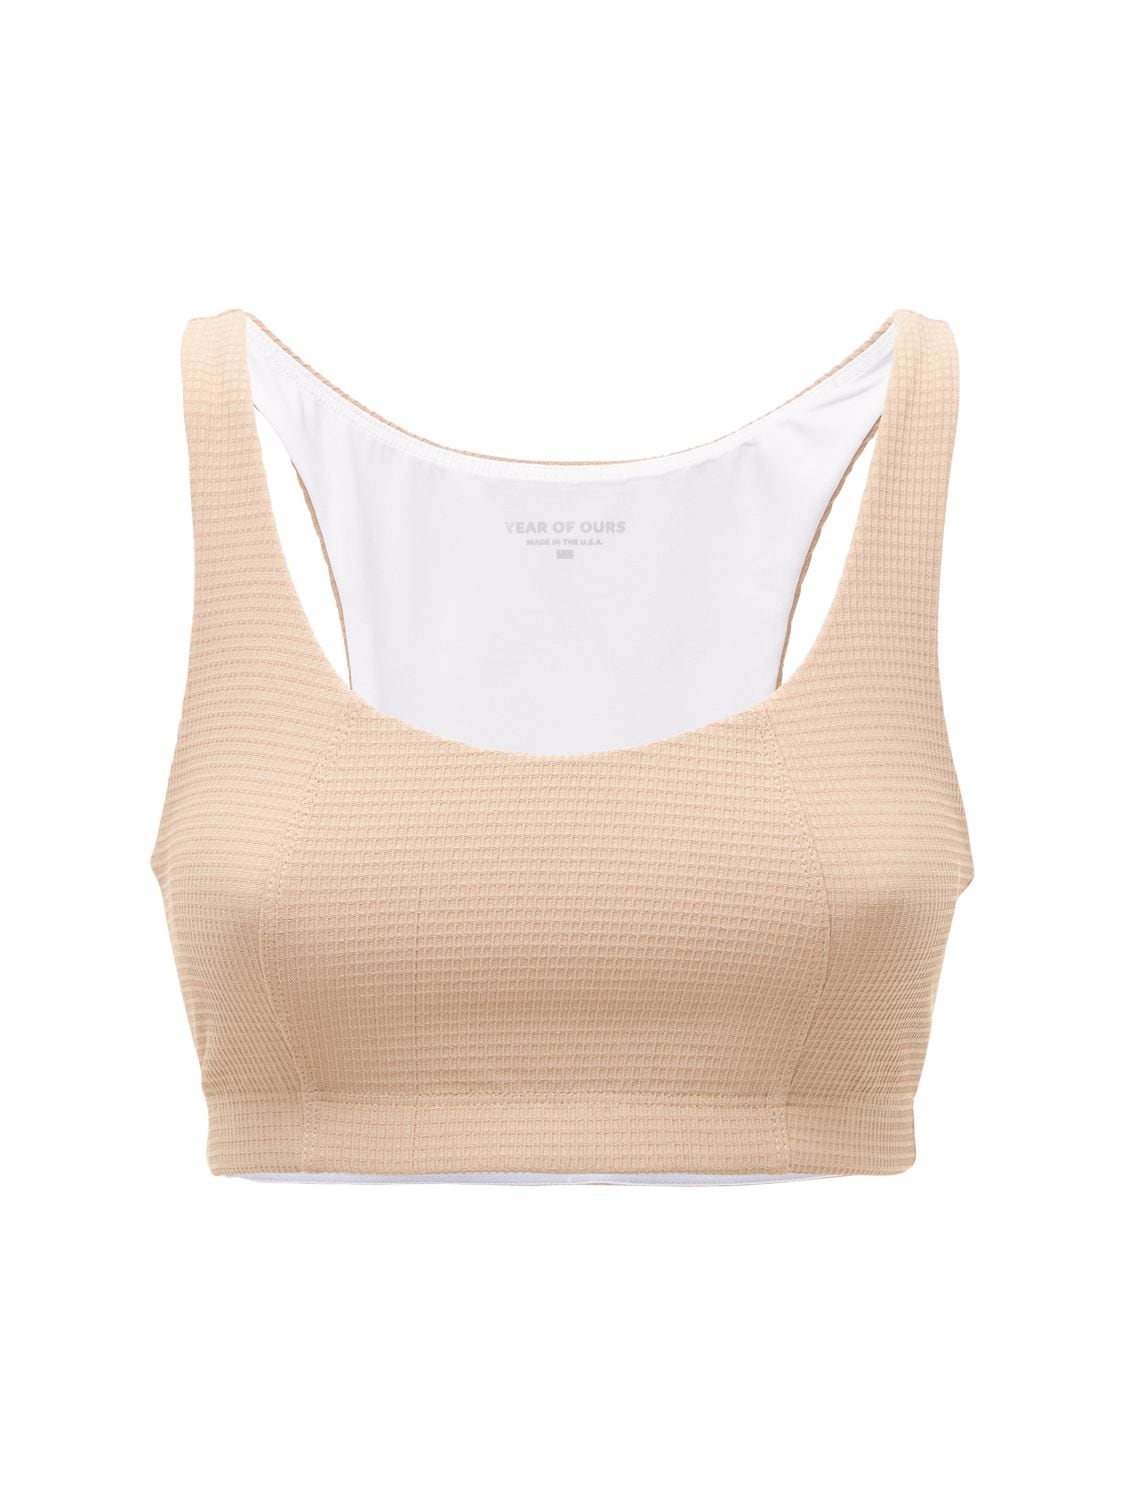 Lily Thermal Bra Top - YEAR OF OURS - Modalova